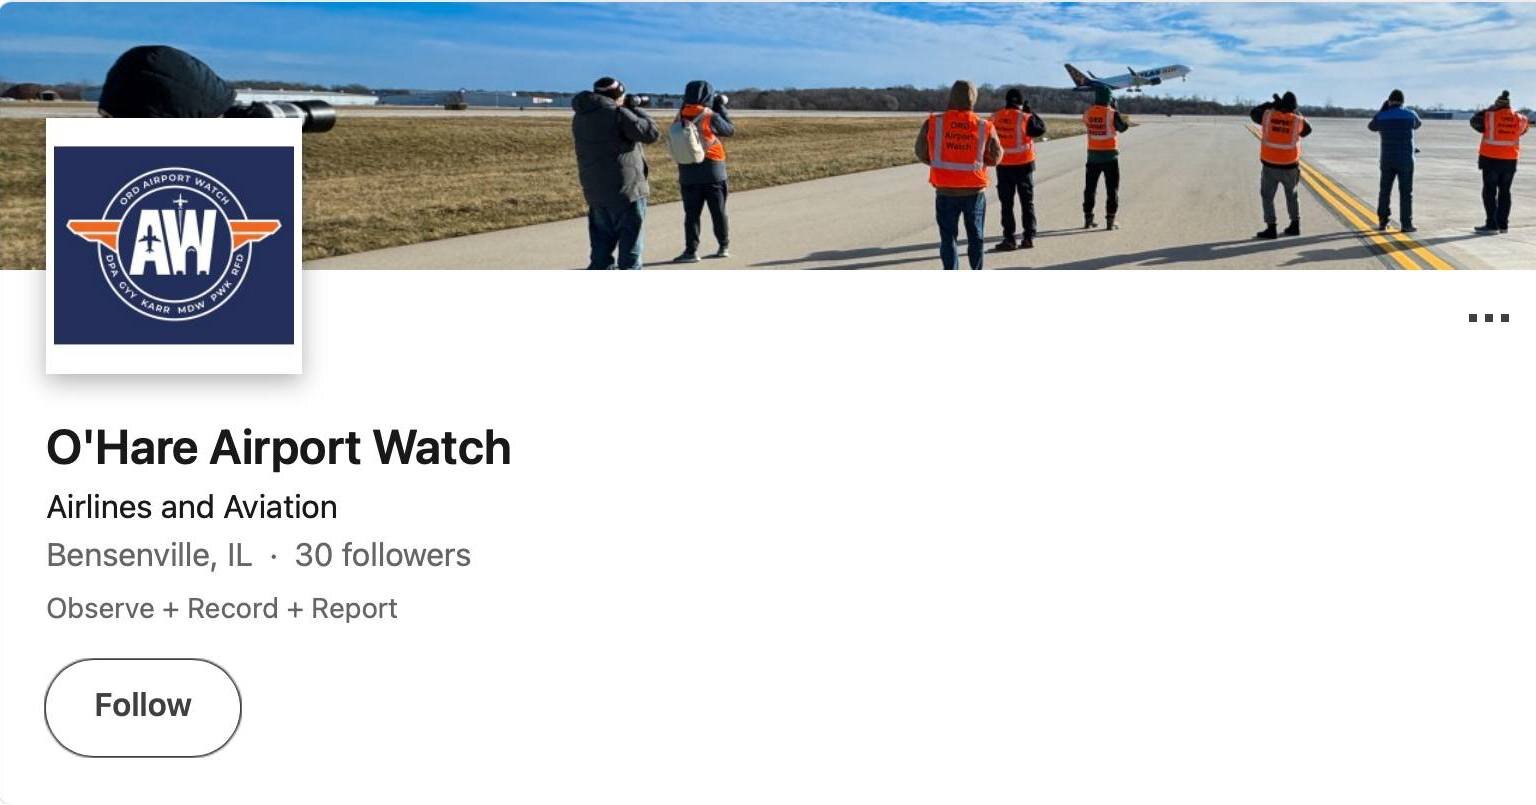 ORD Airport Watch is on LinkedIn! Go check us out and follow: https://www.linkedin.com/company/ord-airport-watch/

#linkedin #ordairportwatch